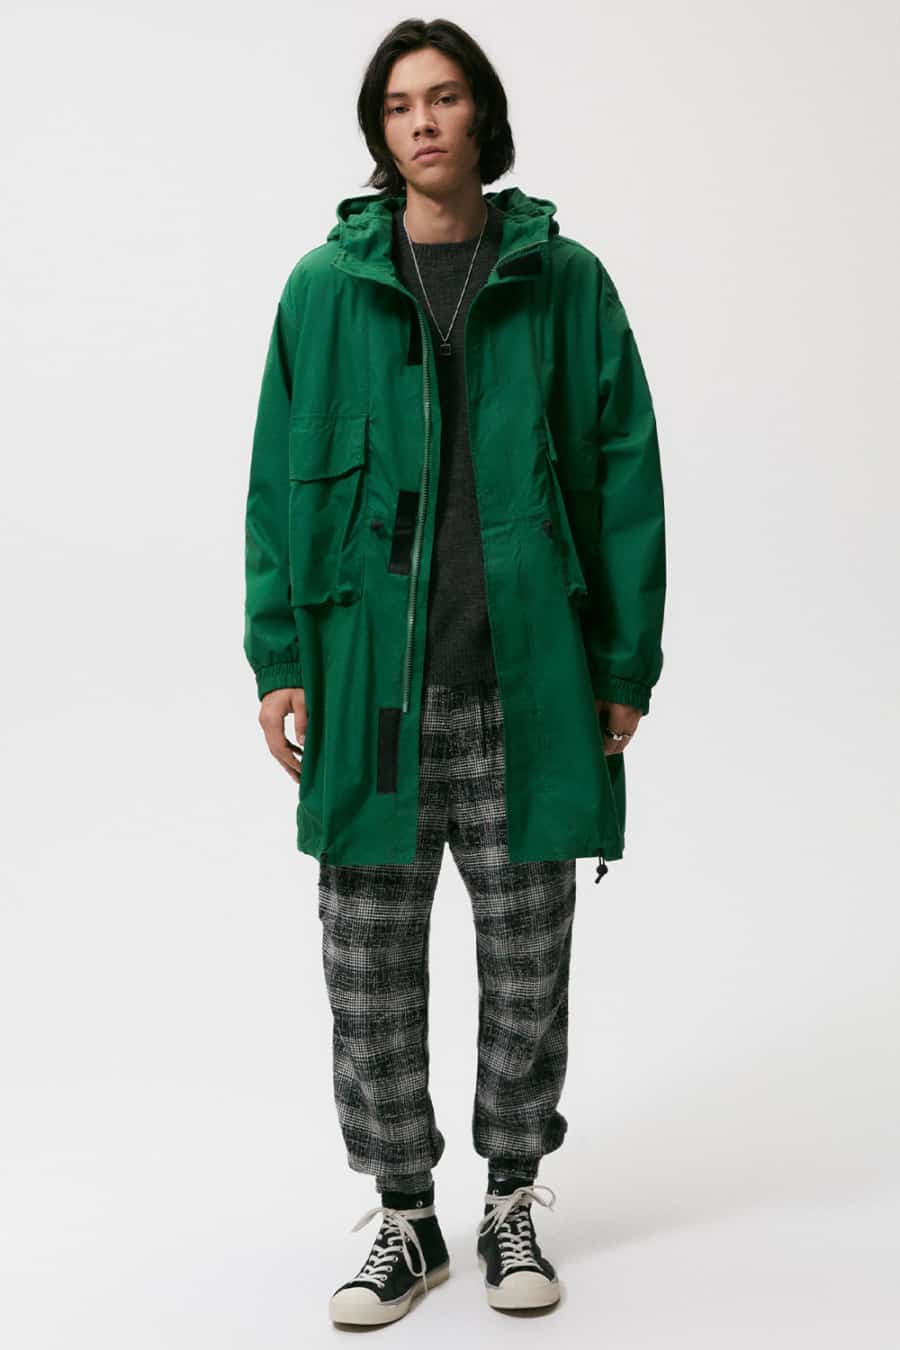 Men's checked cuffed pants, knitted sweater and green parka jacket worn with high-top sneakers outfit